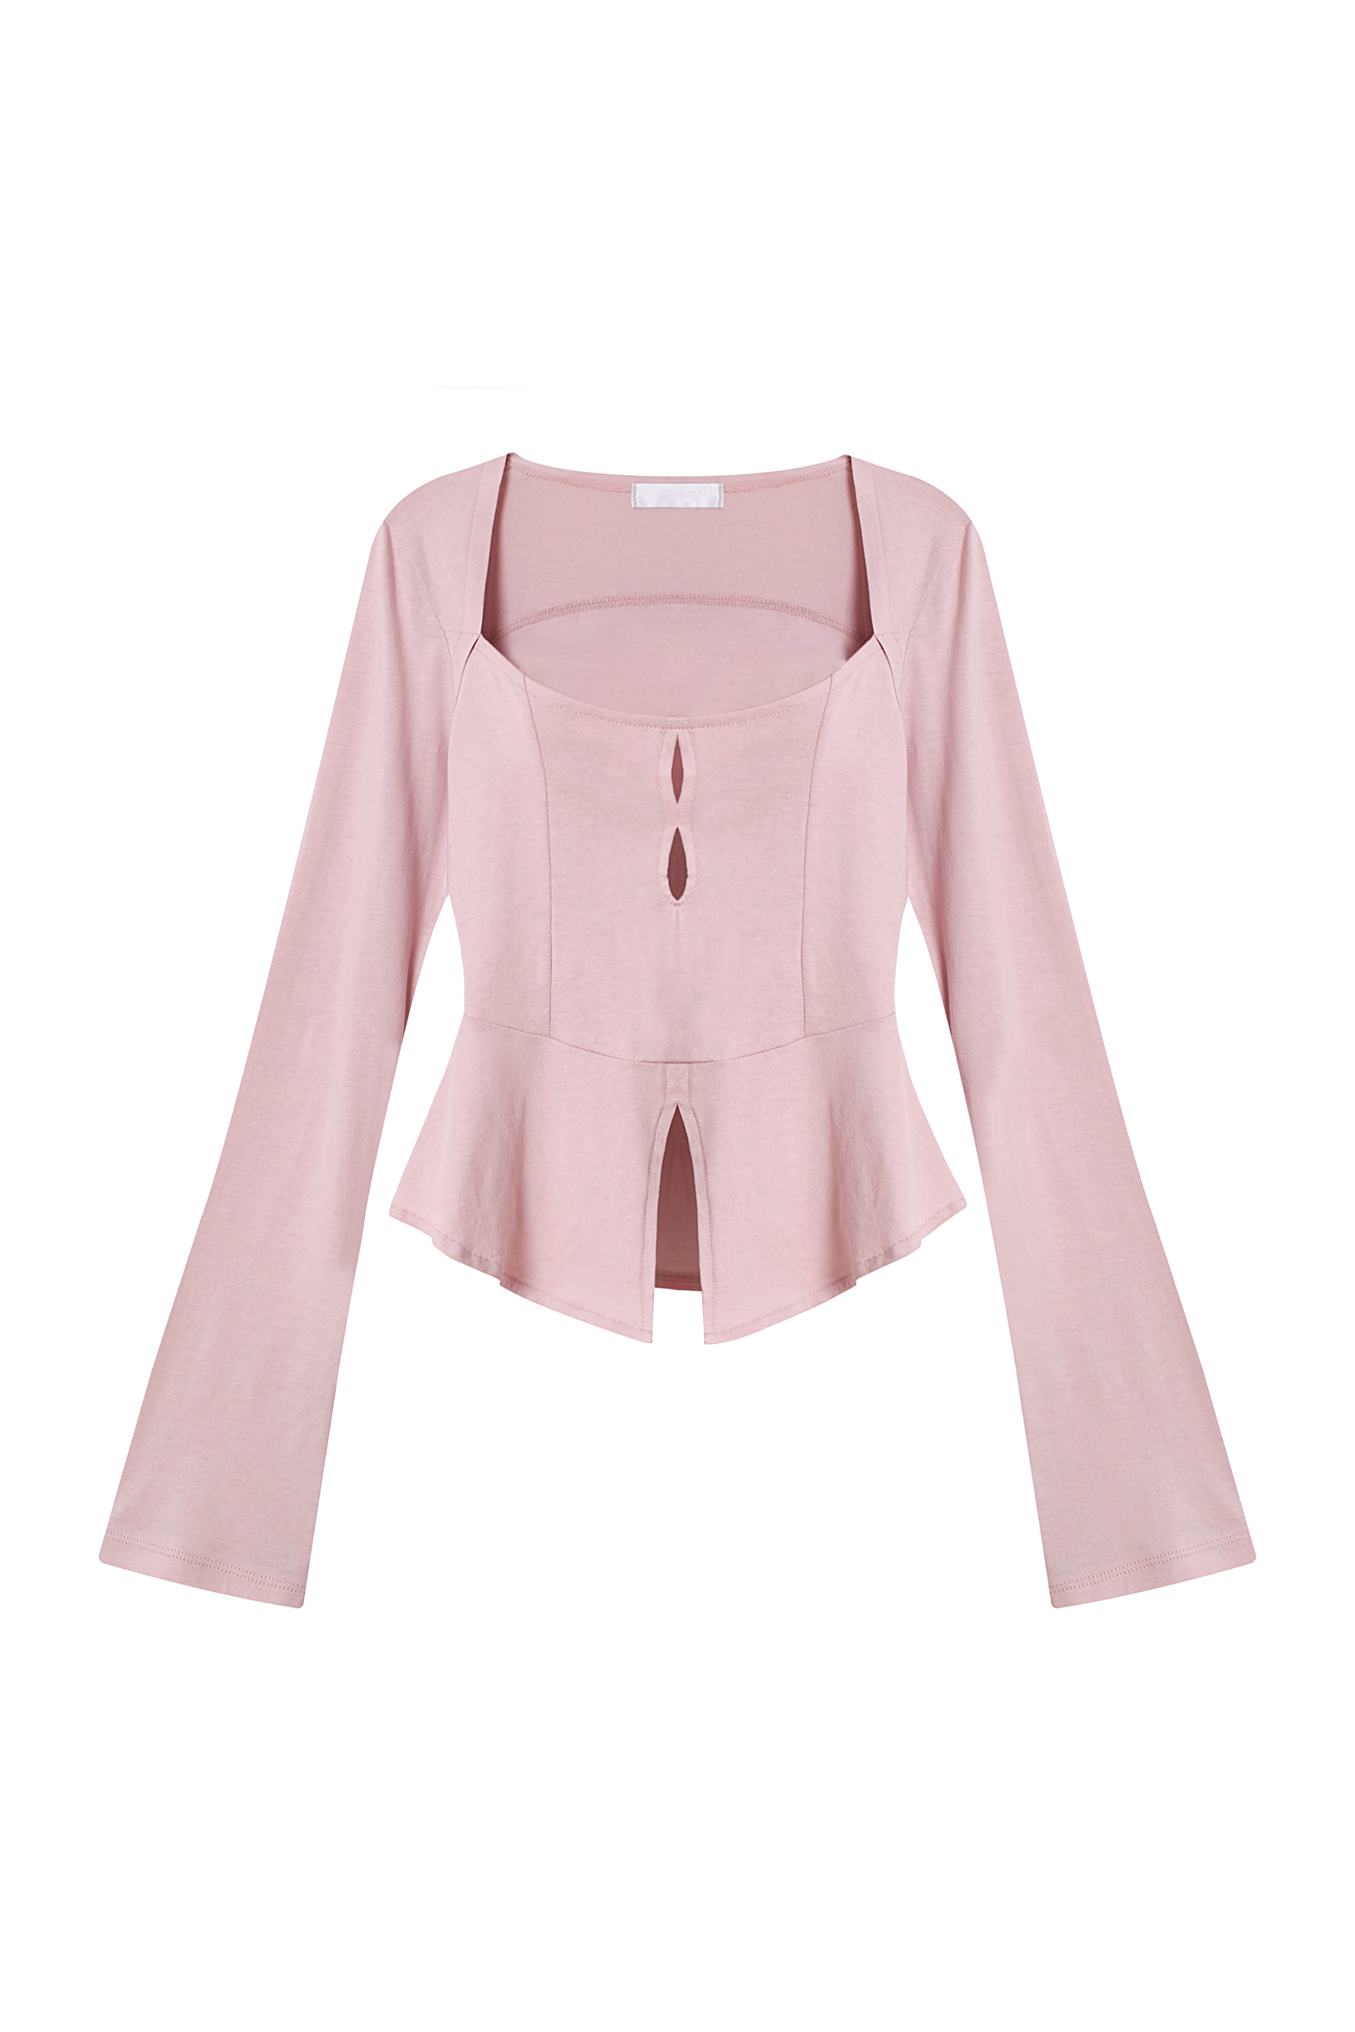 DAPHNE FLARED TOP [PINK]